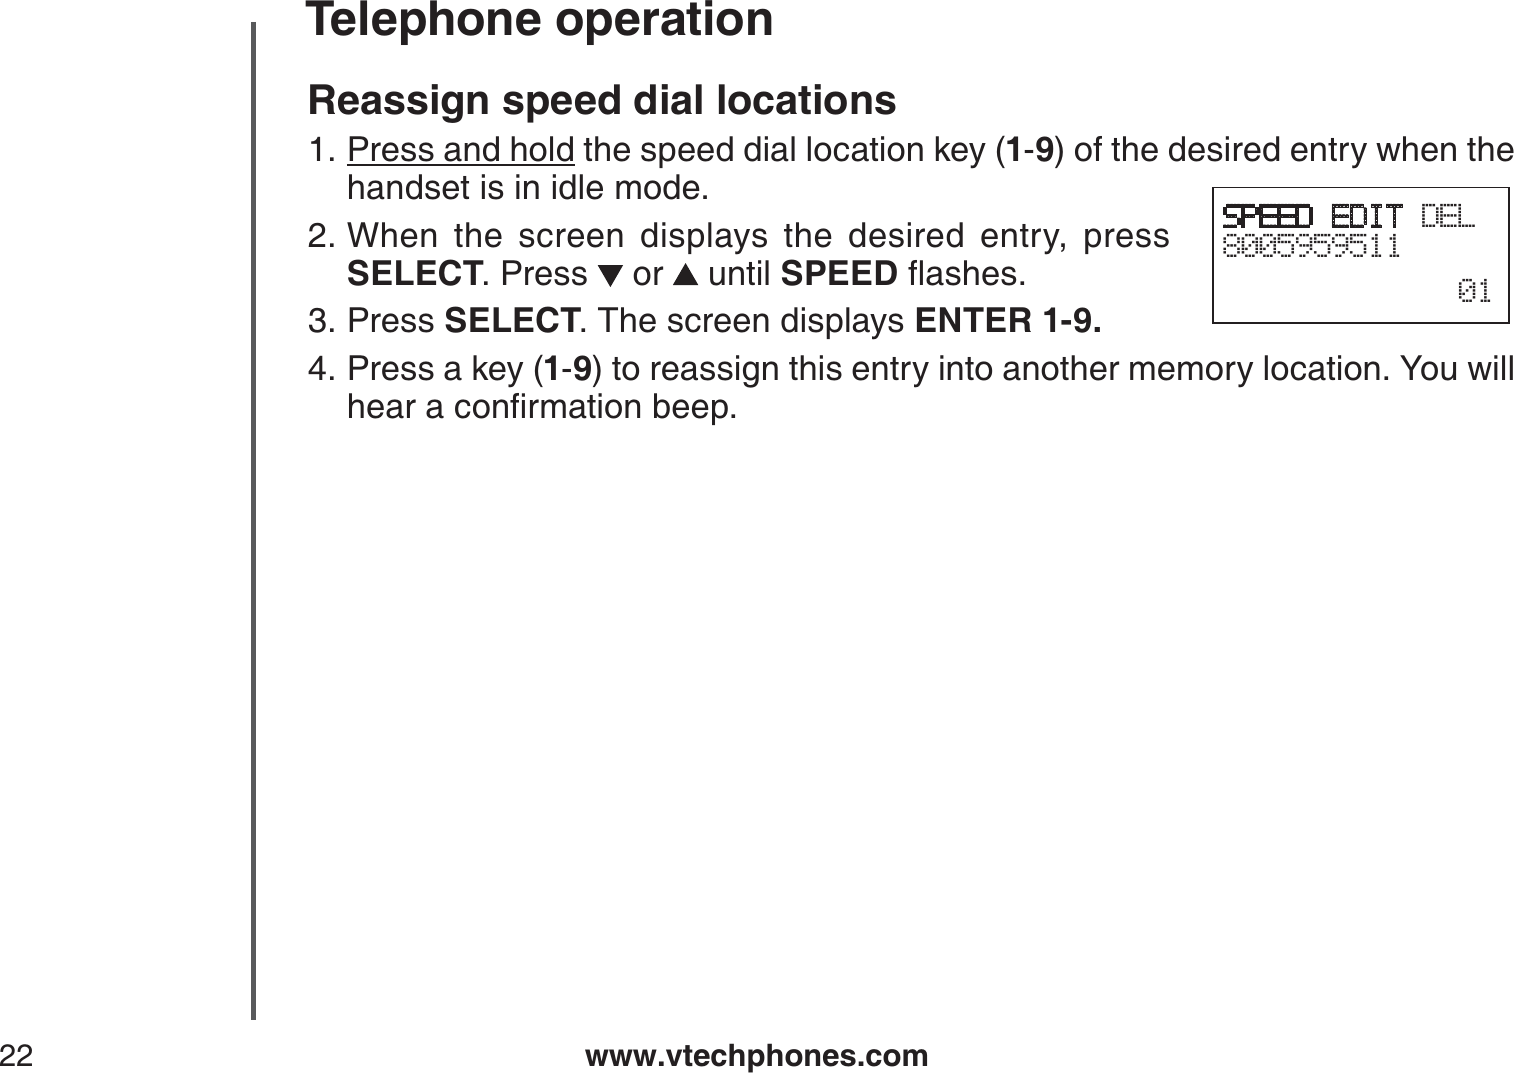 www.vtechphones.com22Telephone operationReassign speed dial locationsPress and hold the speed dial location key (1-9) of the desired entry when the handset is in idle mode.When the screen displays the desired entry, press SELECT. Press   or   until SPEEDƀCUJGUPress SELECT. The screen displays ENTER 1-9.Press a key (1-9) to reassign this entry into another memory location. You willJGCTCEQPſTOCVKQPDGGR1.2.3.4.SPEED EDIT DEL800595951101